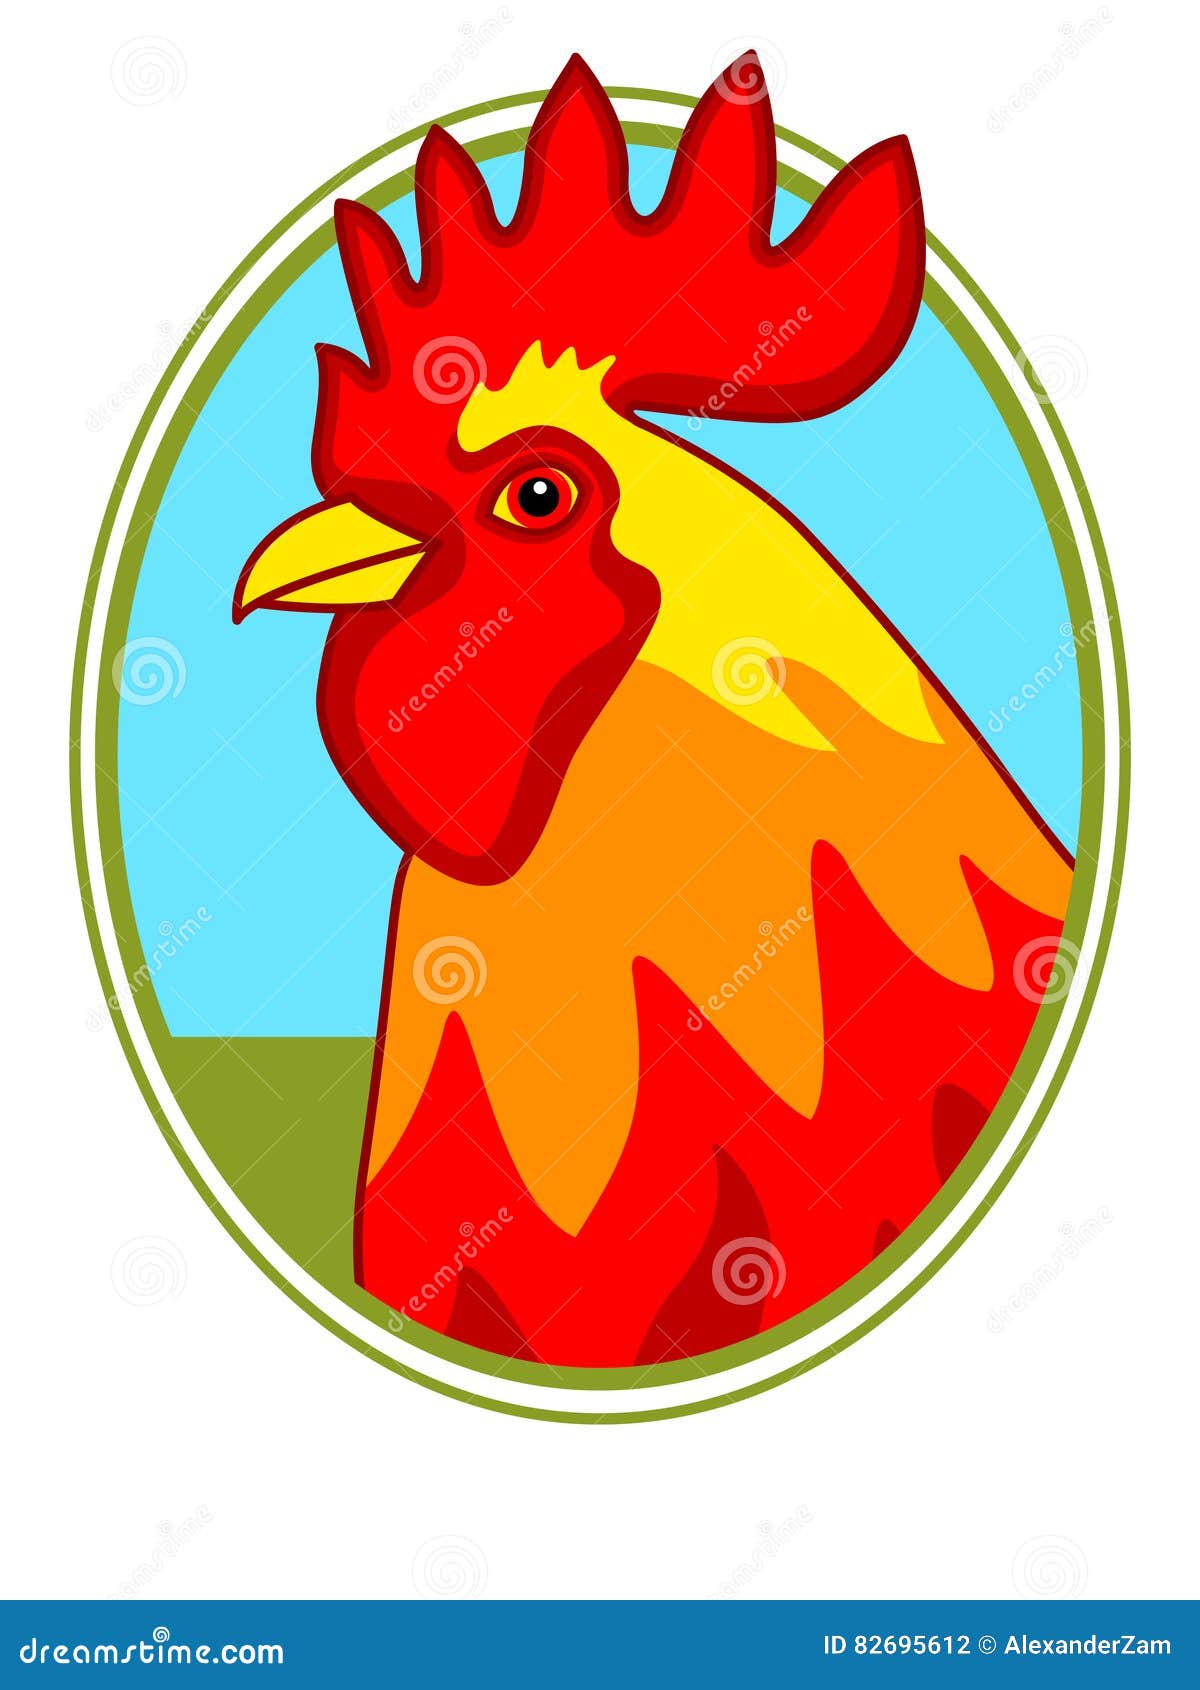 Rooster portrait icon stock vector. Illustration of rooster - 82695612